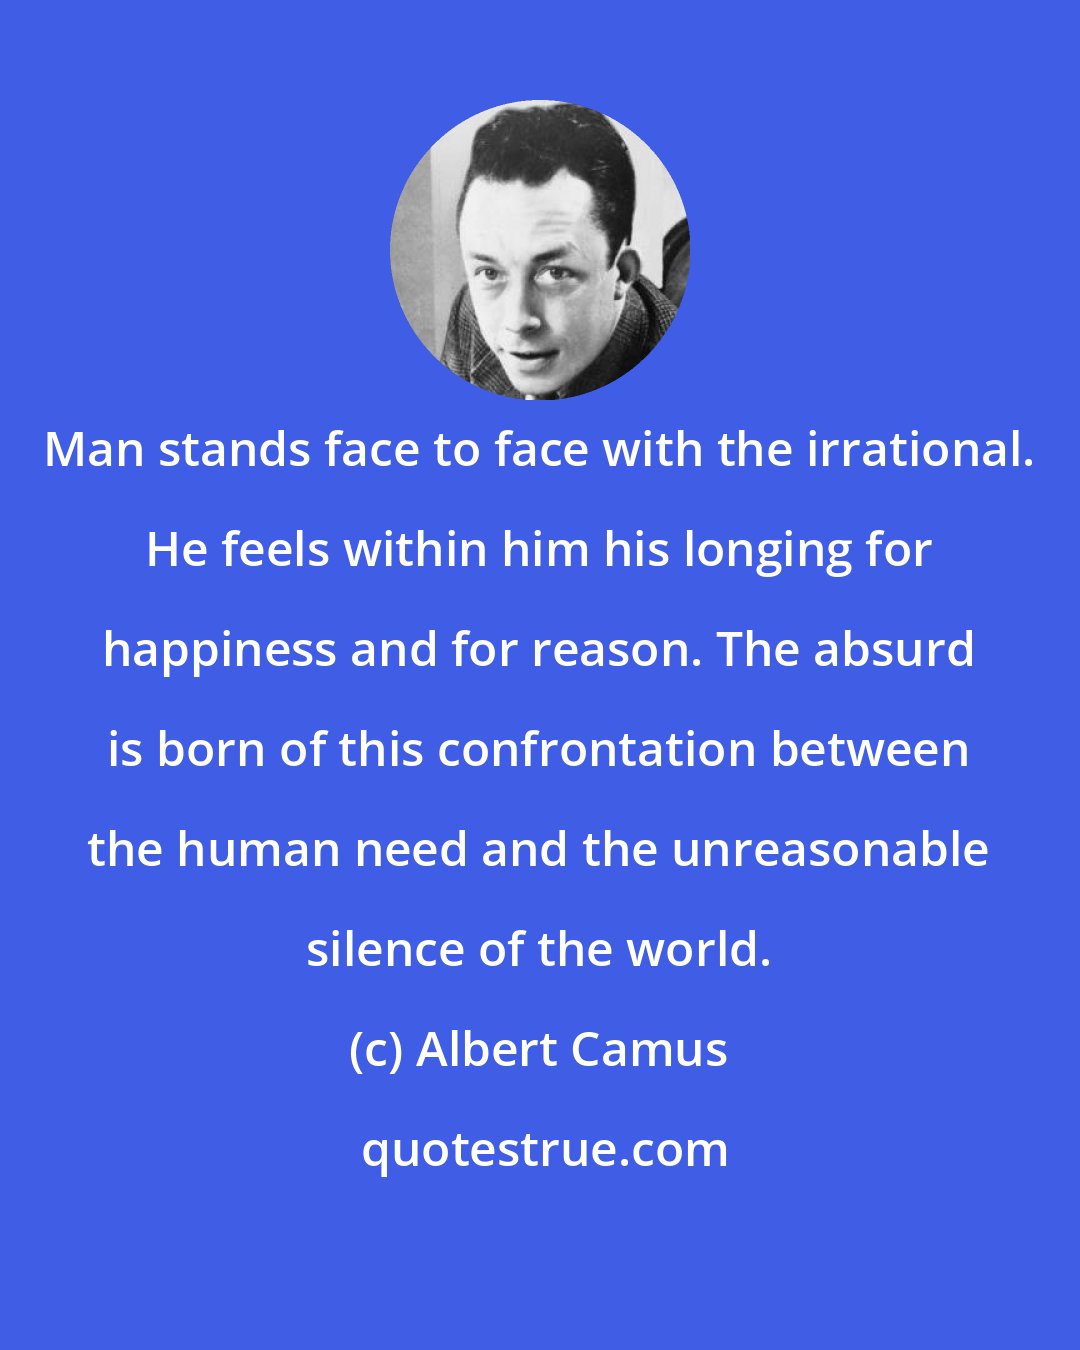 Albert Camus: Man stands face to face with the irrational. He feels within him his longing for happiness and for reason. The absurd is born of this confrontation between the human need and the unreasonable silence of the world.